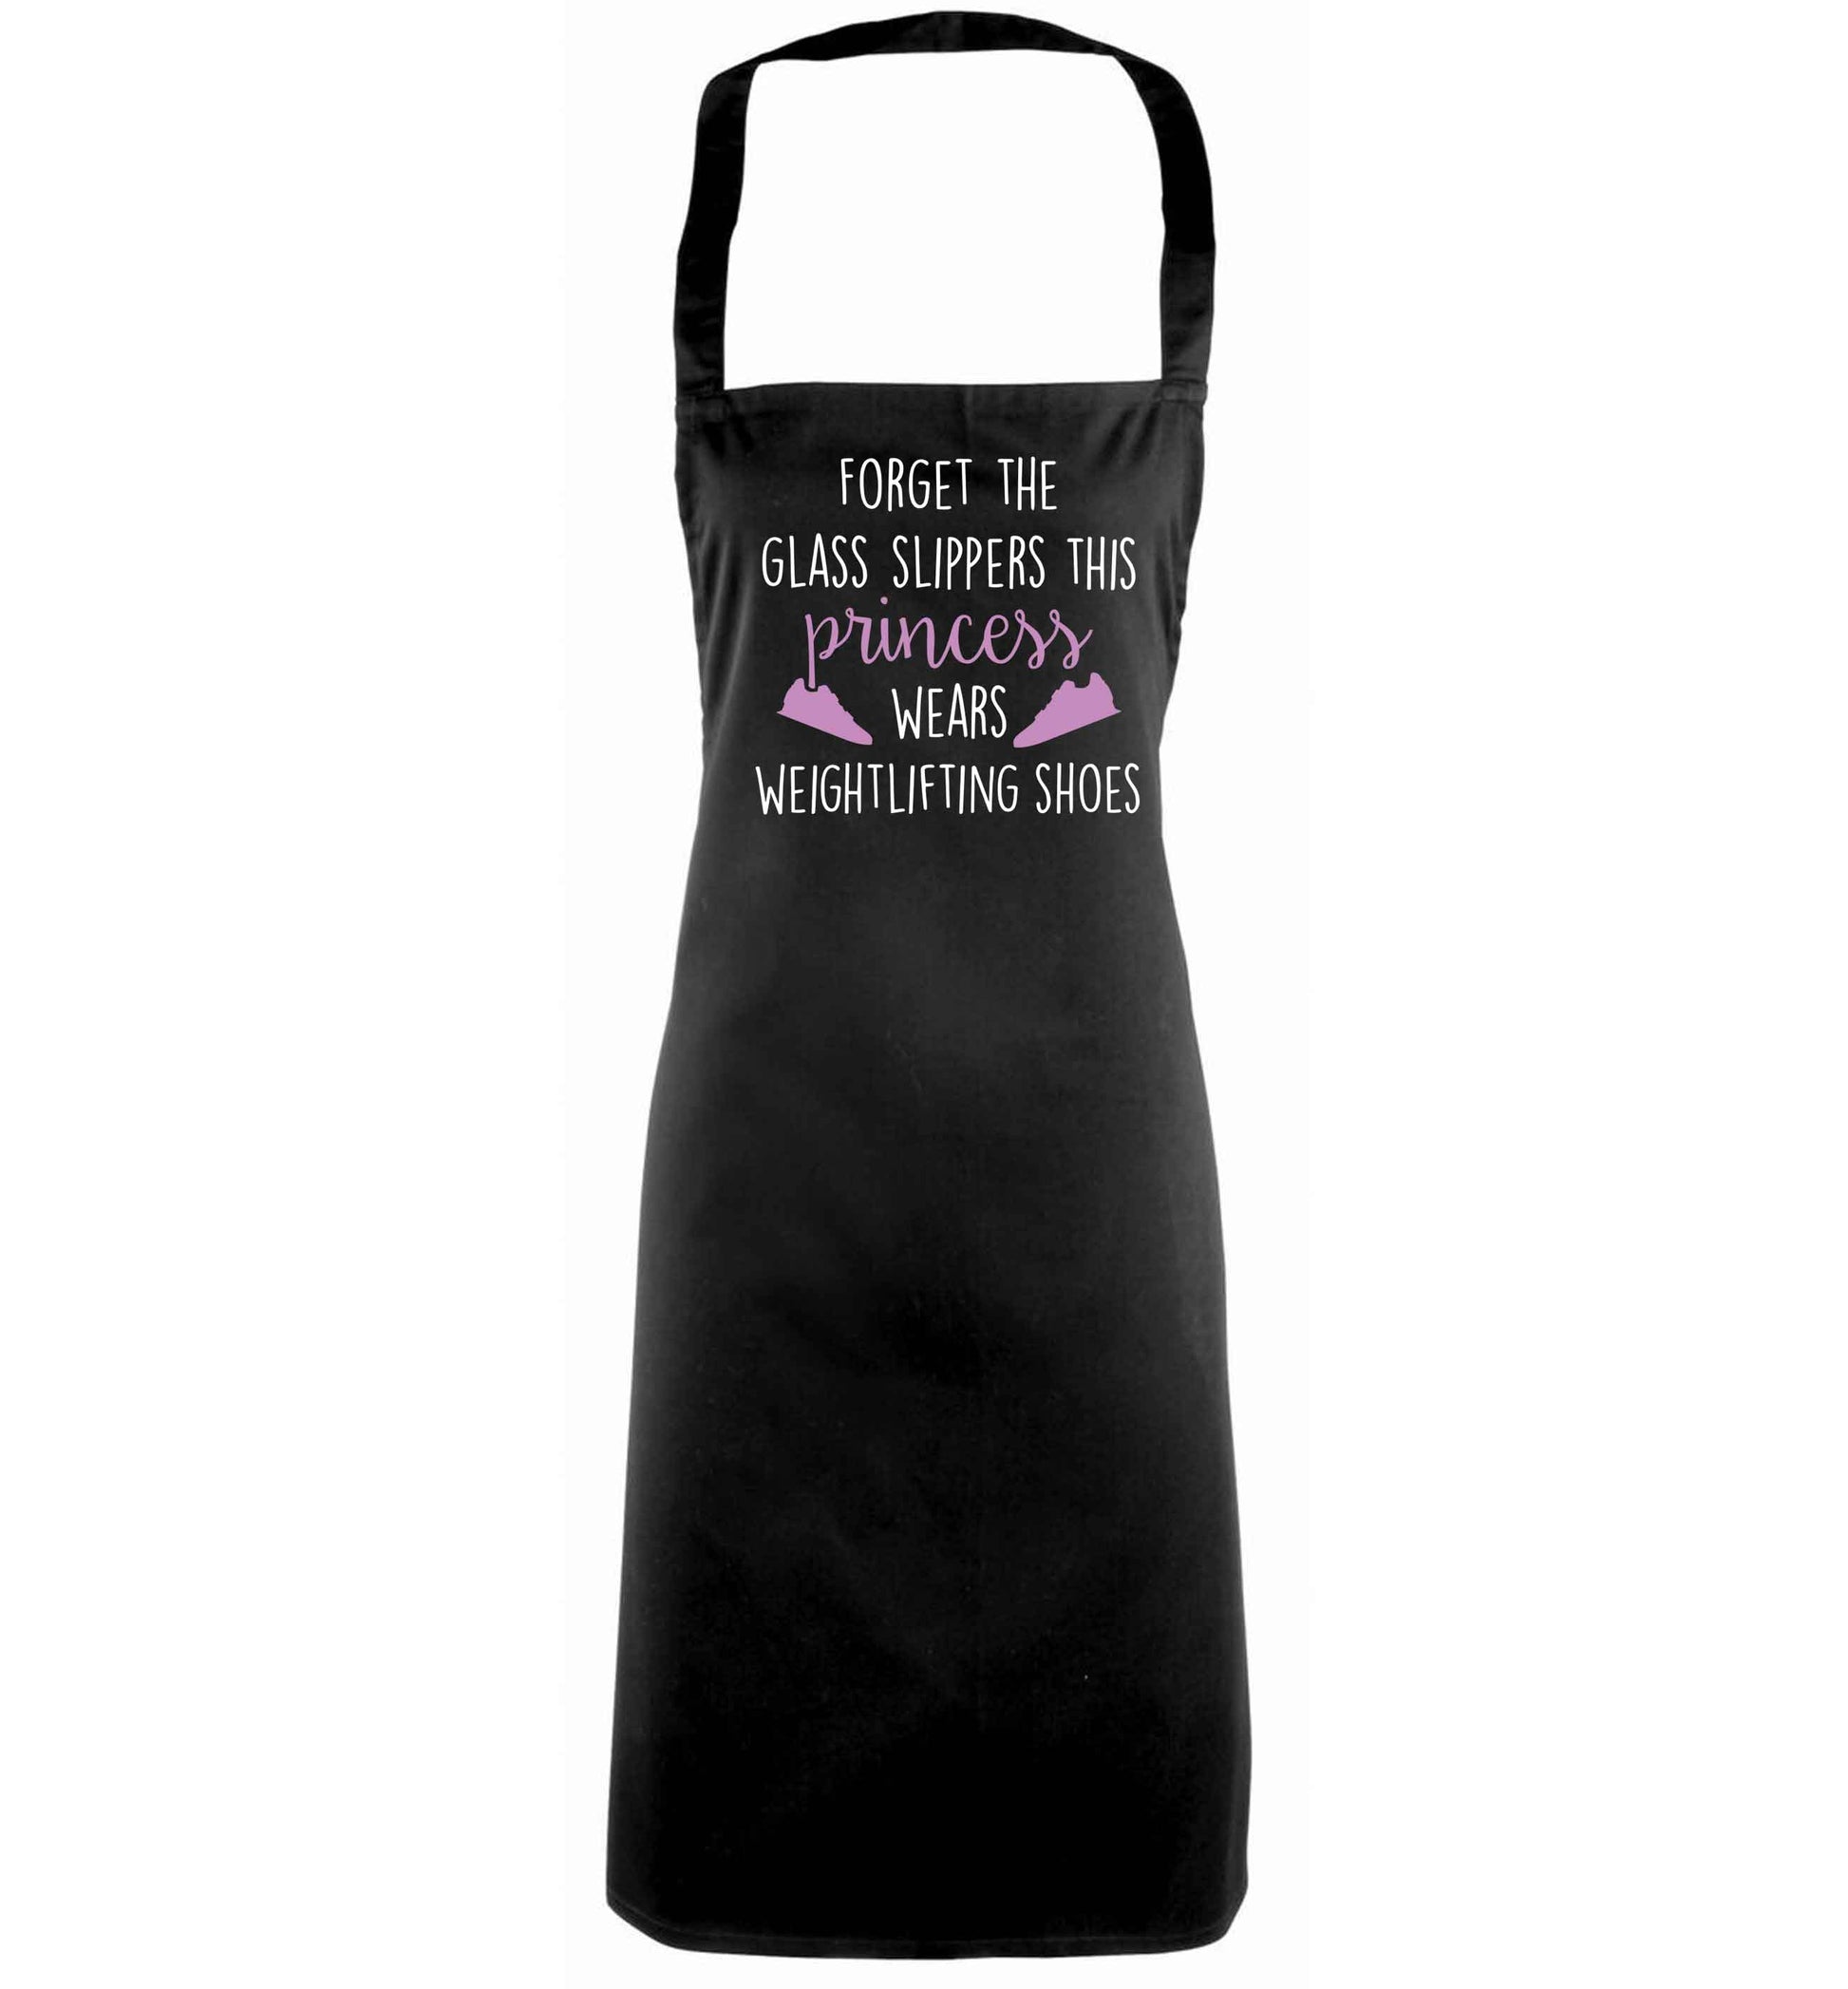 Forget the glass slippers this princess wears weightlifting shoes black apron